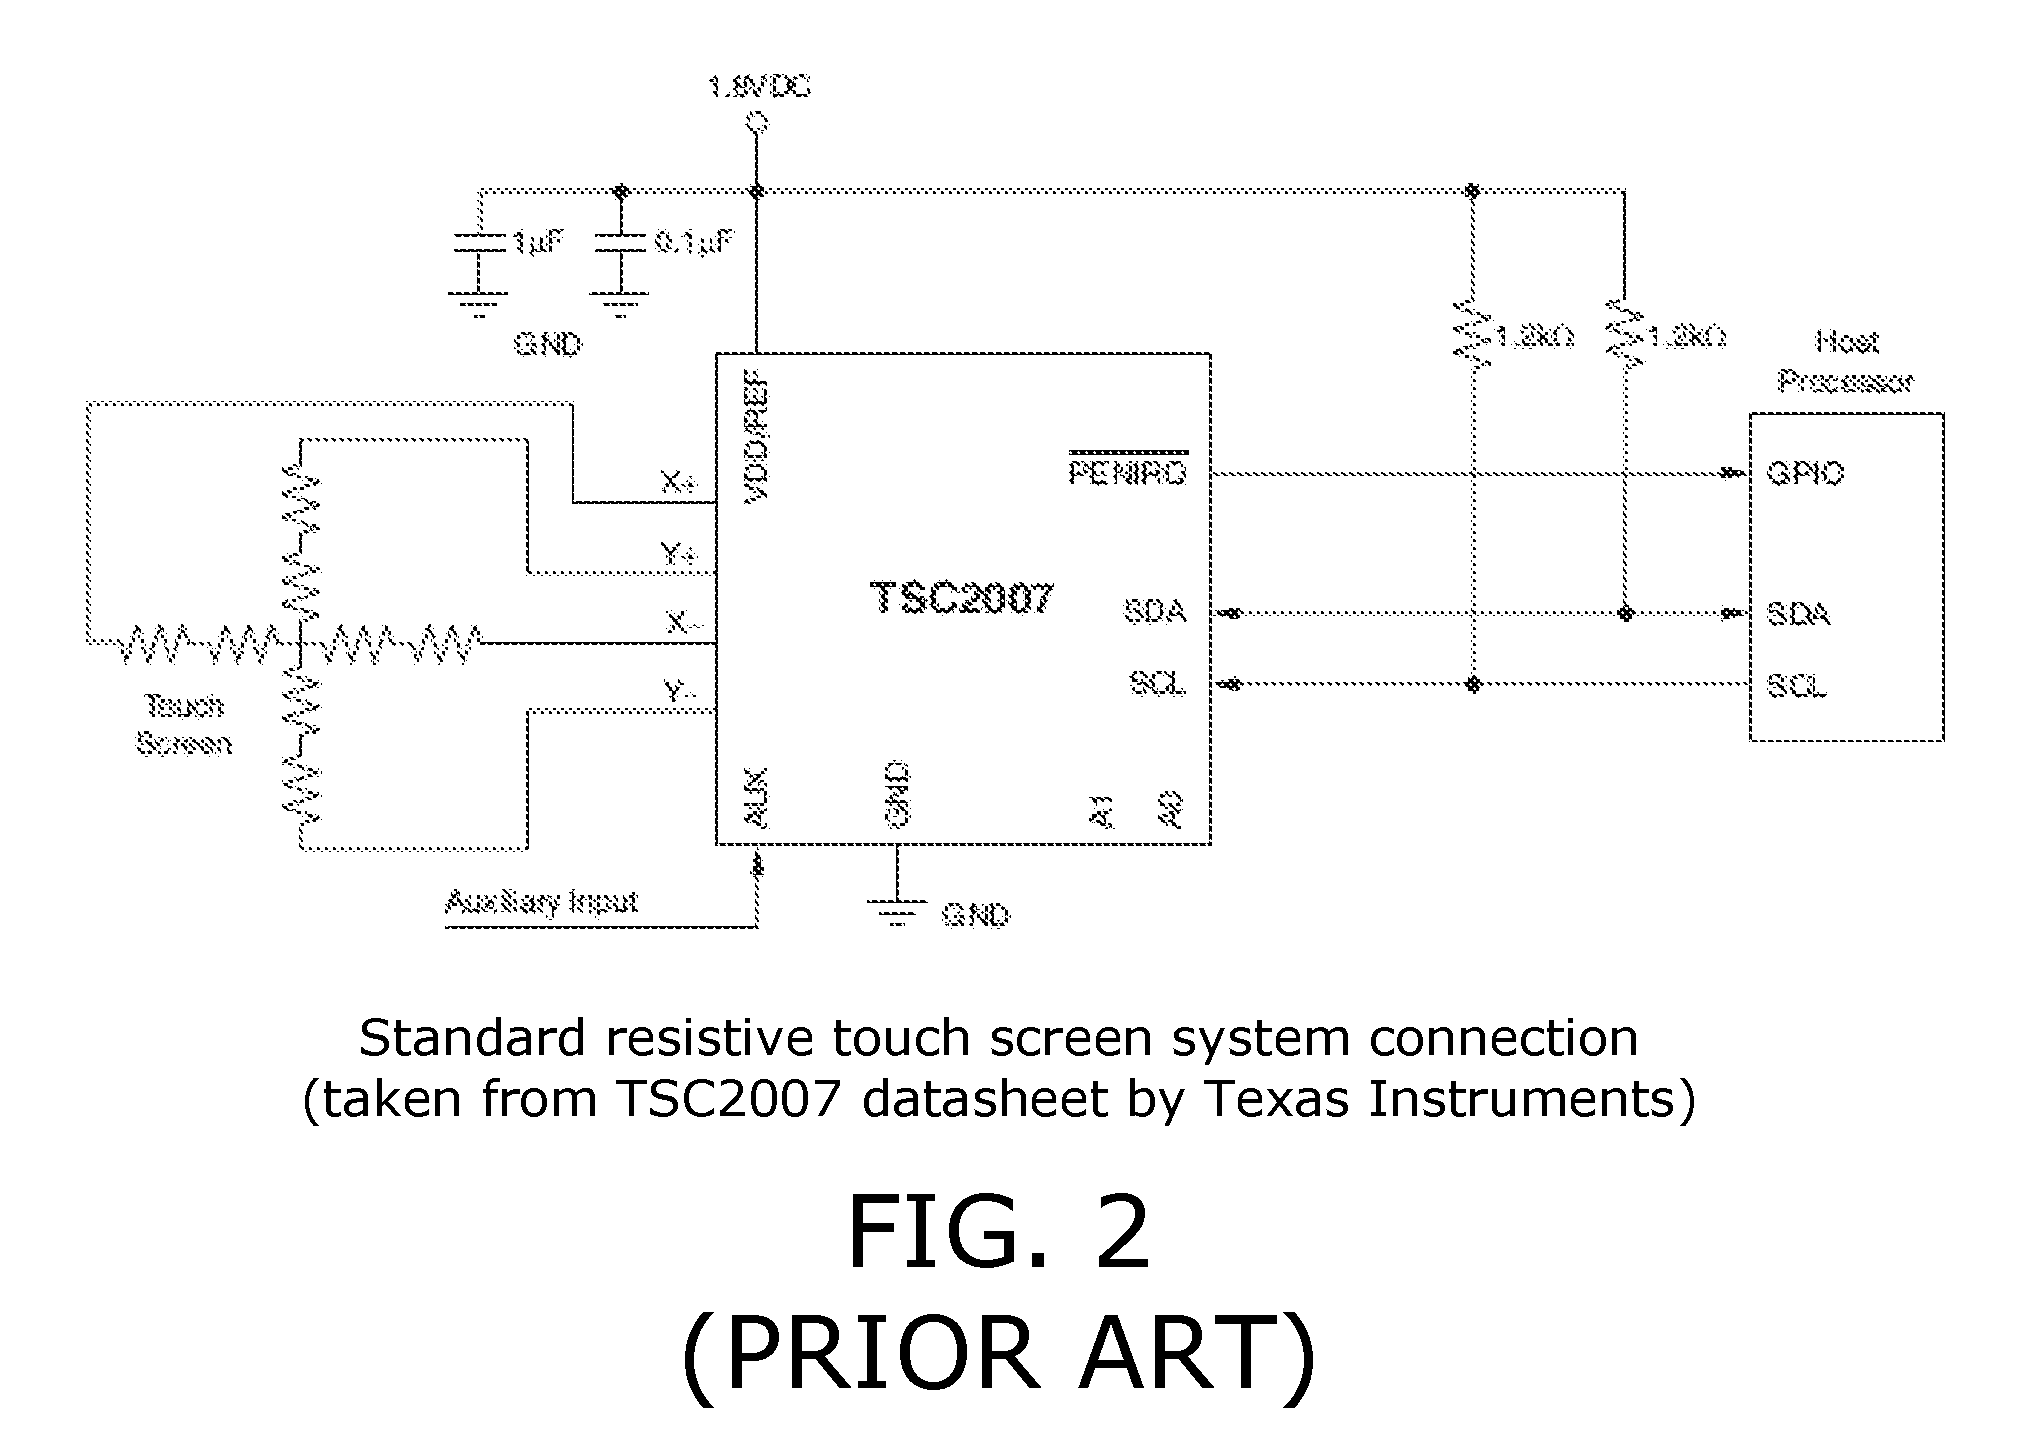 Implementation of multi-touch gestures using a resistive touch display